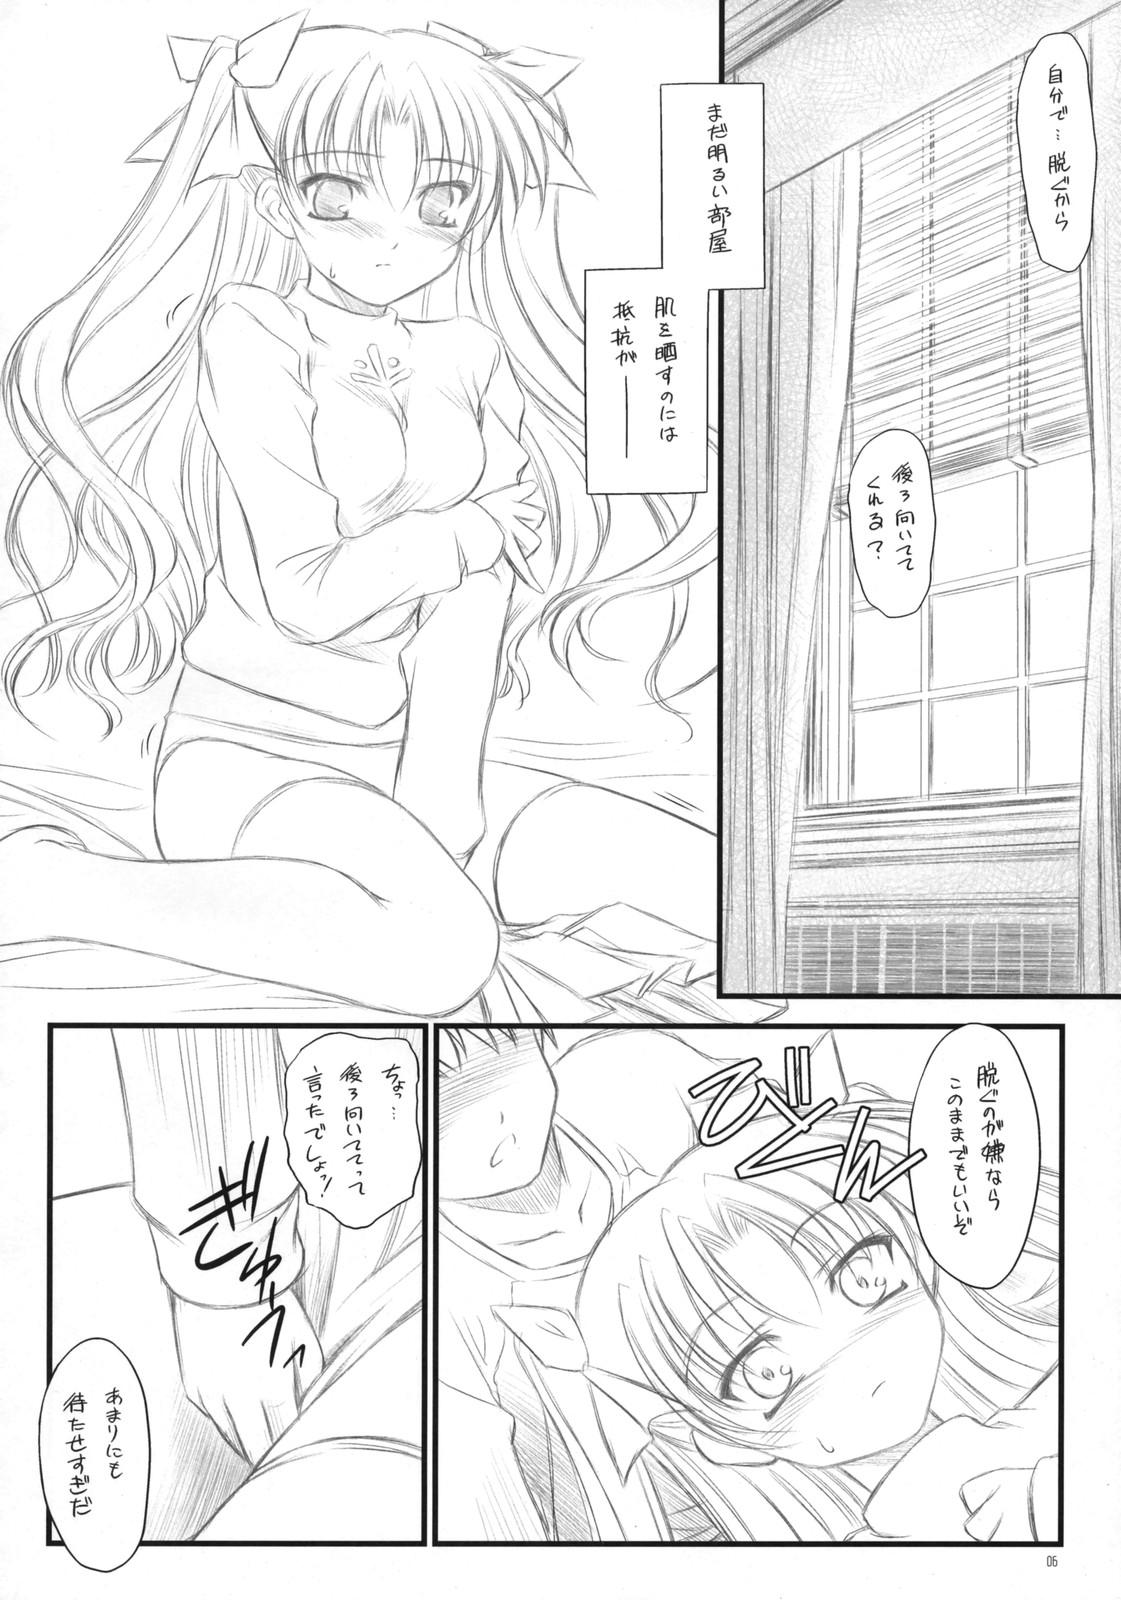 Porn Blow Jobs Prunus Persica - Fate stay night Sweet - Page 5